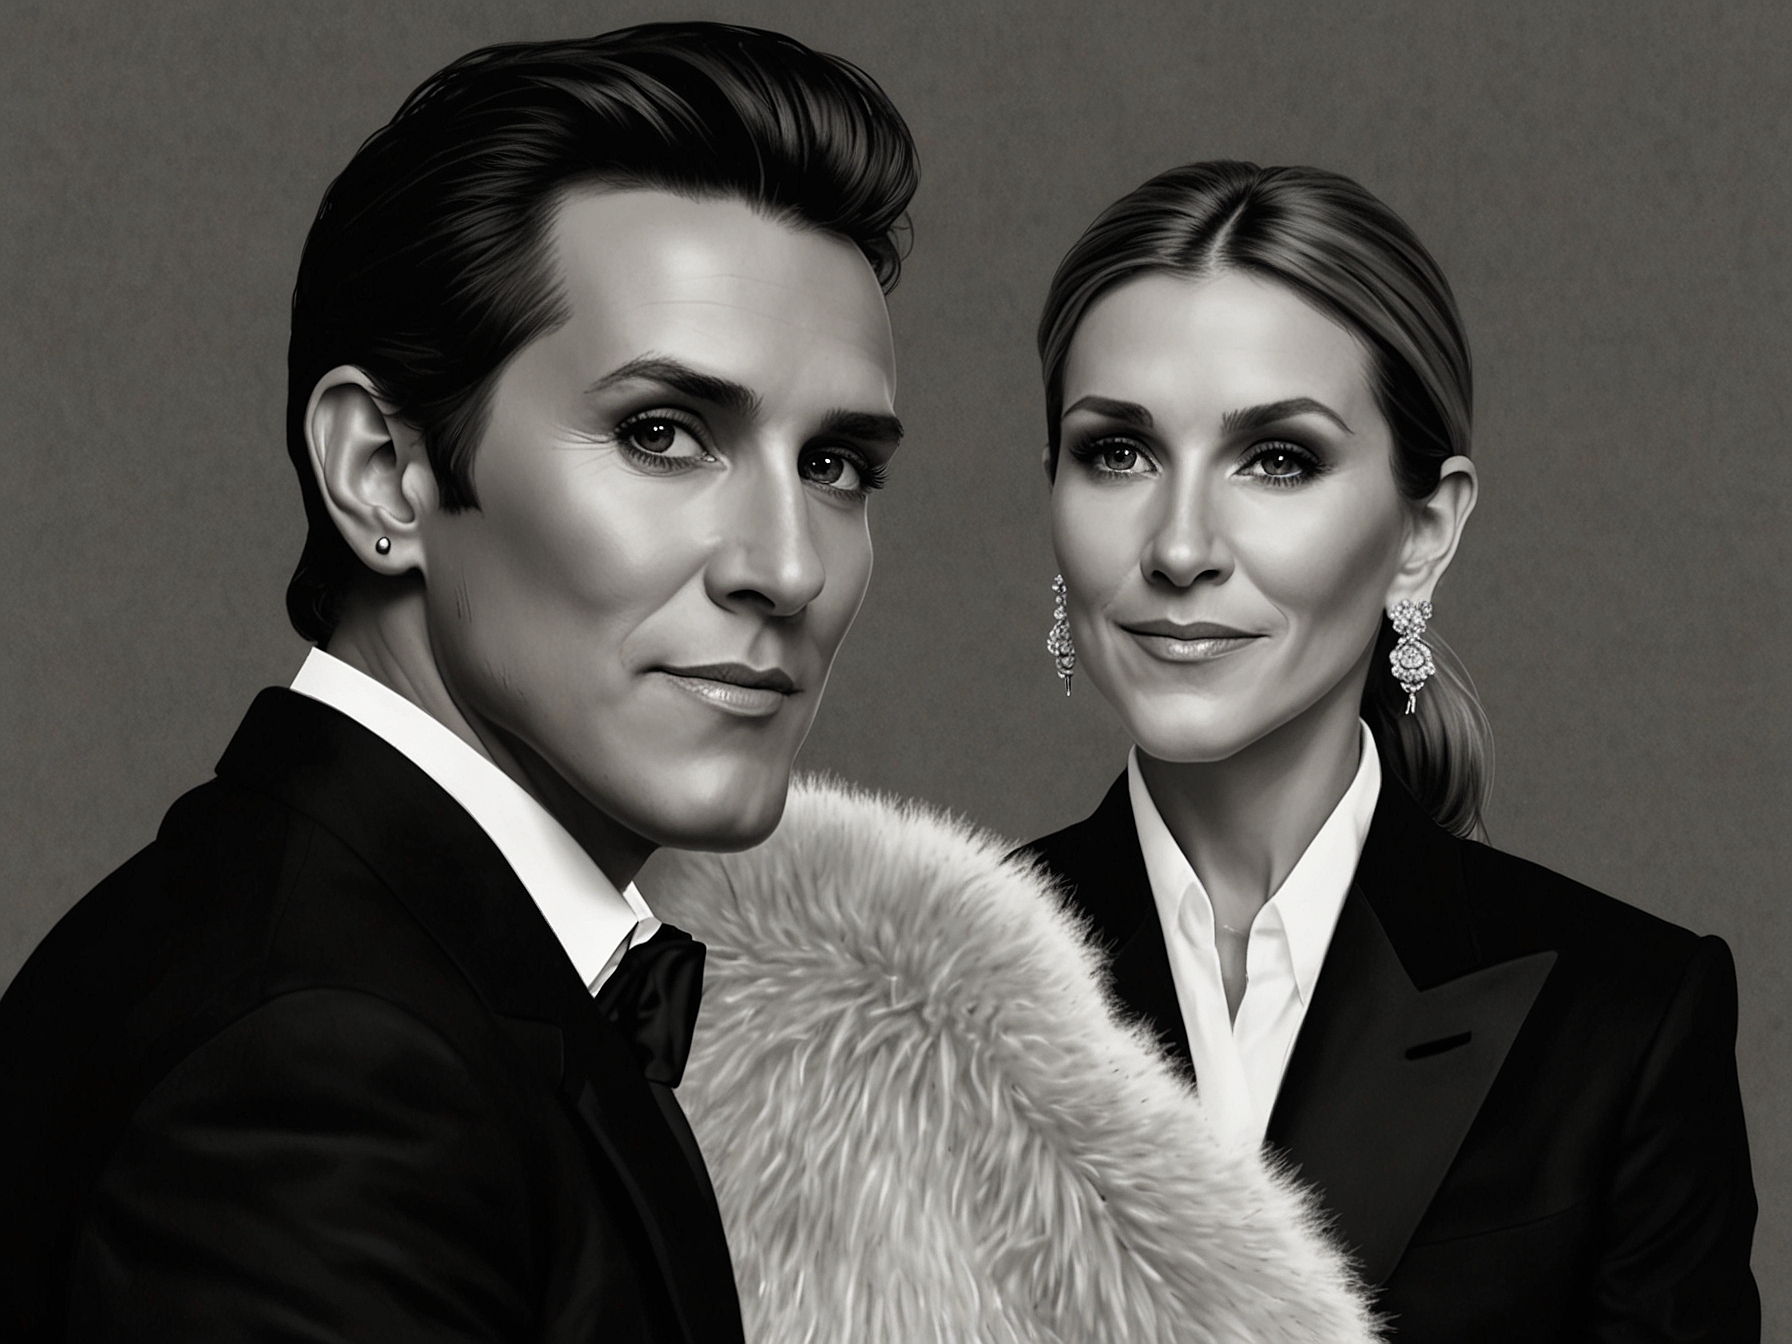 Céline Dion and her son René-Charles Angélil at the premiere of her documentary, both elegantly dressed, symbolizing their tight-knit relationship and mutual support in difficult times.